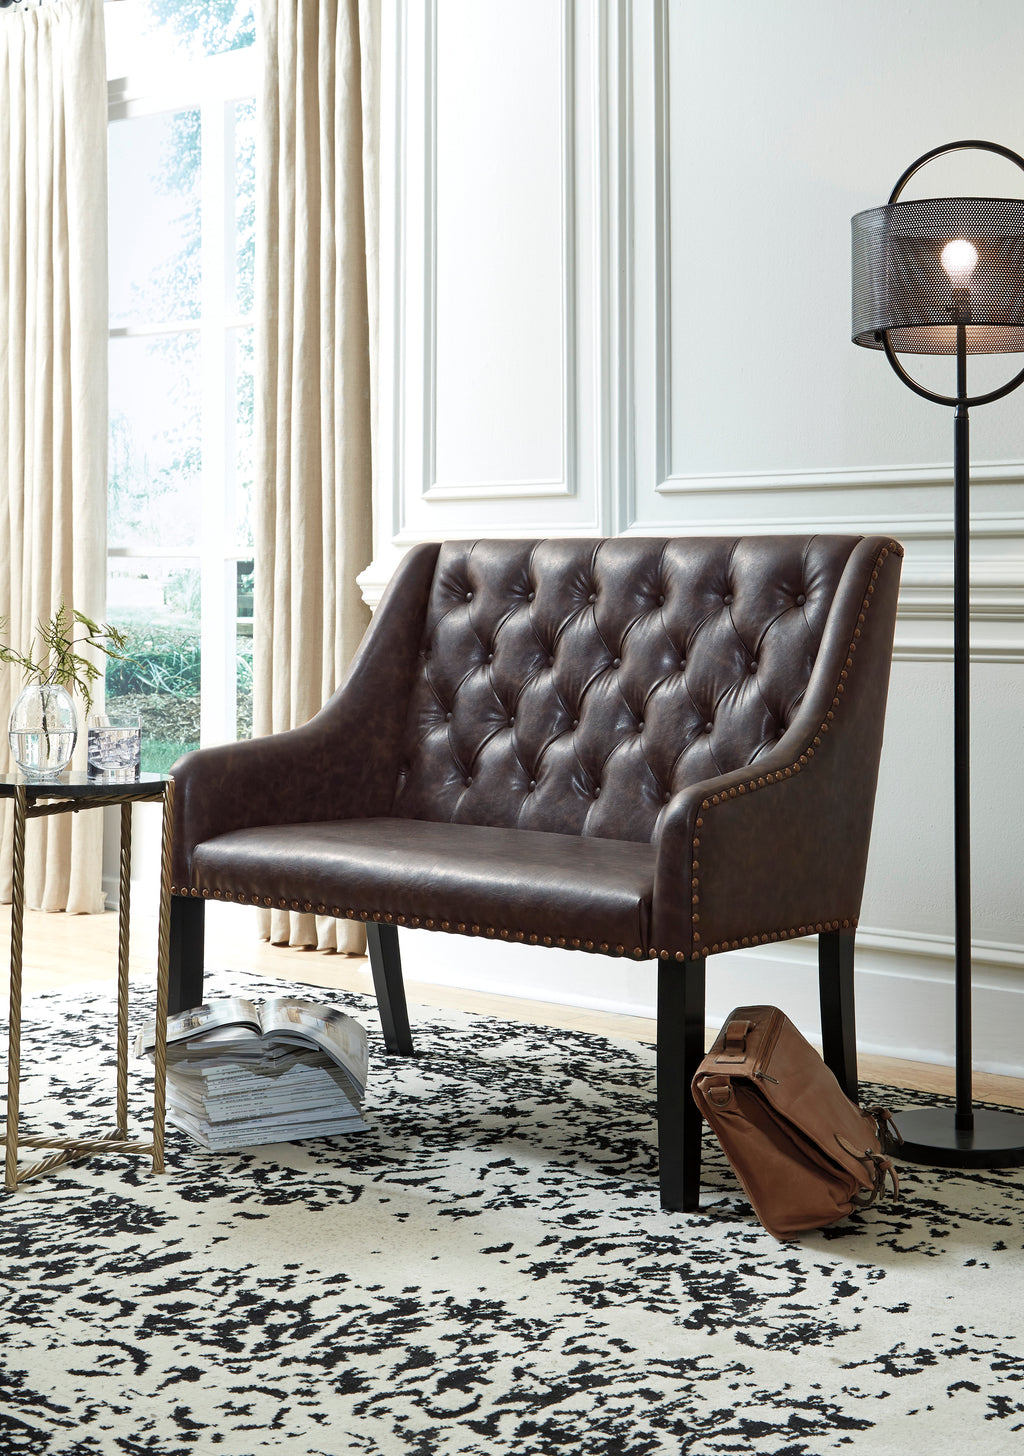 Distressed Brown Leatherette Settee